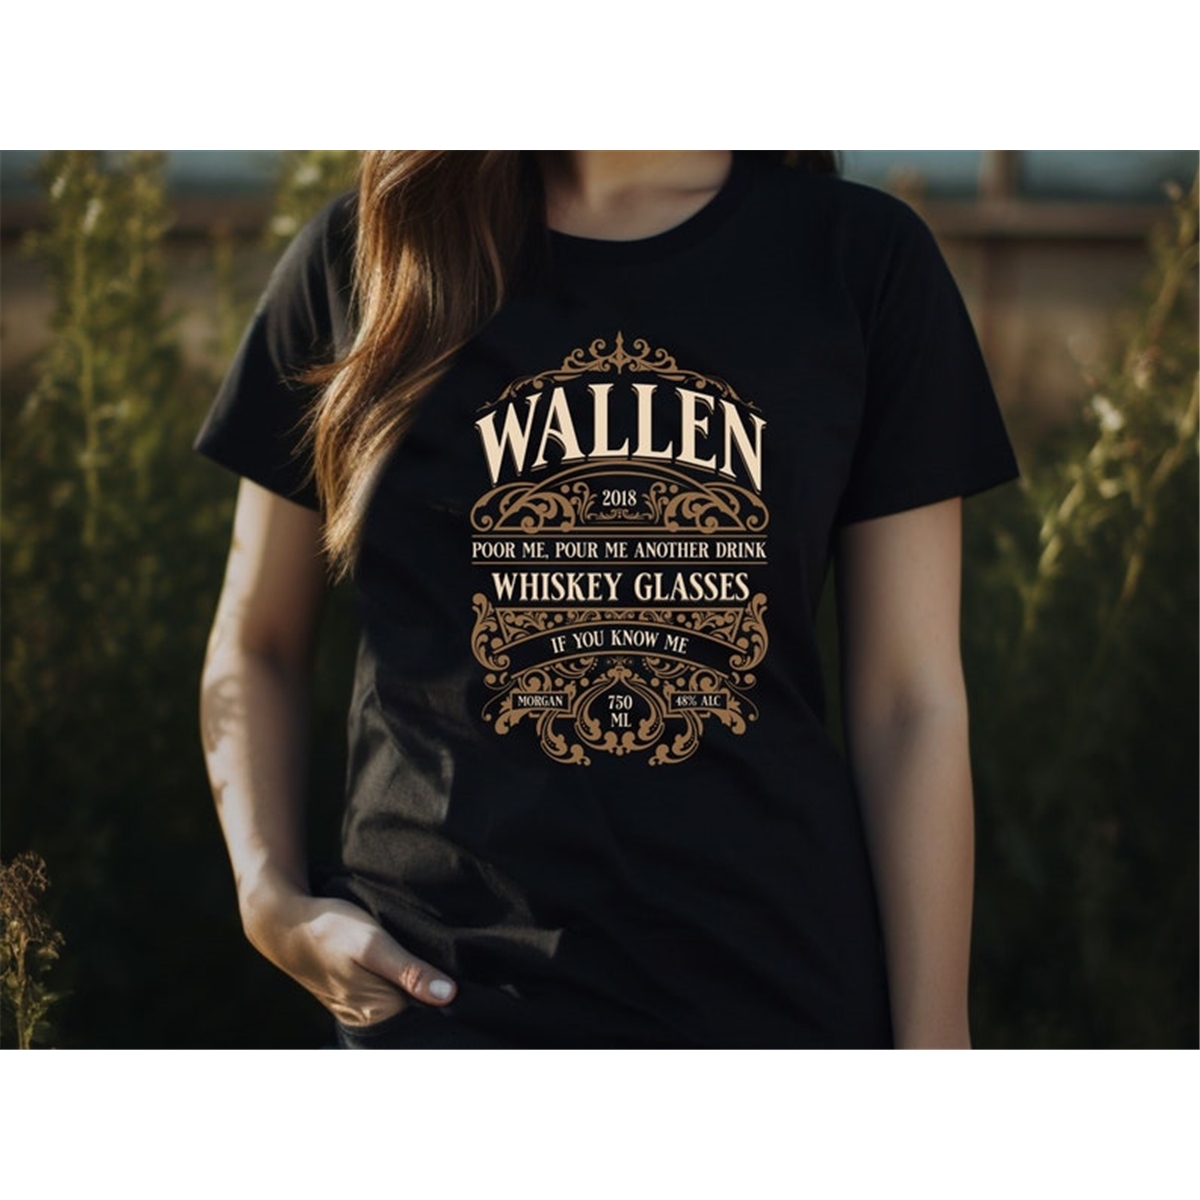 wallen-whiskey-glasses-wasted-on-you-sumblimation-design-retro-image-1